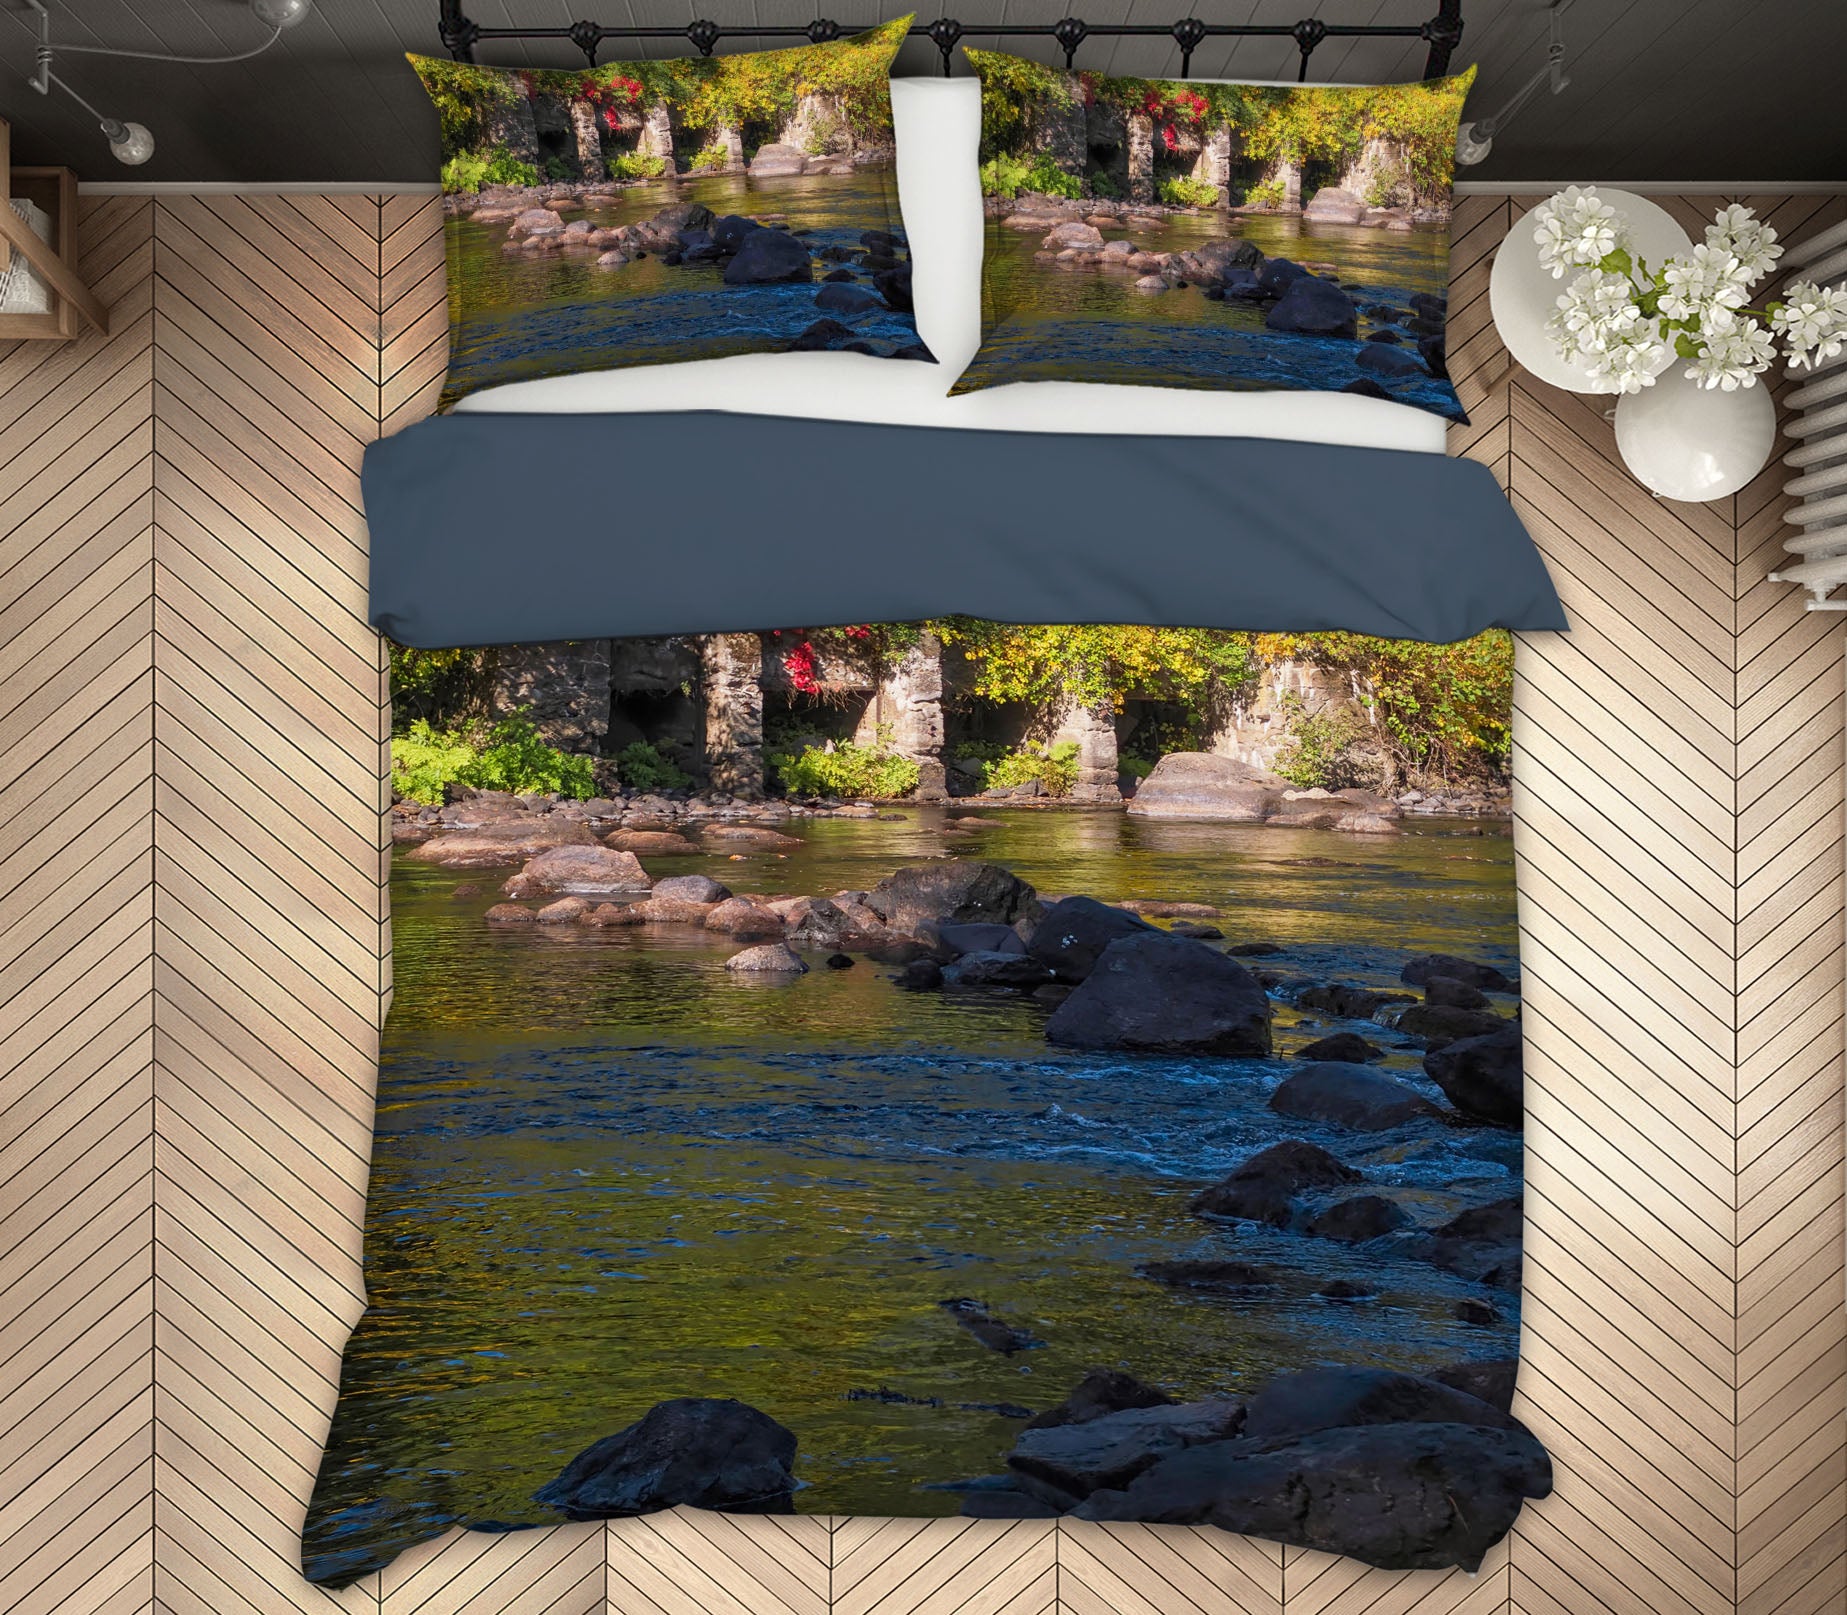 3D River Stones Leaves 1018 Jerry LoFaro bedding Bed Pillowcases Quilt